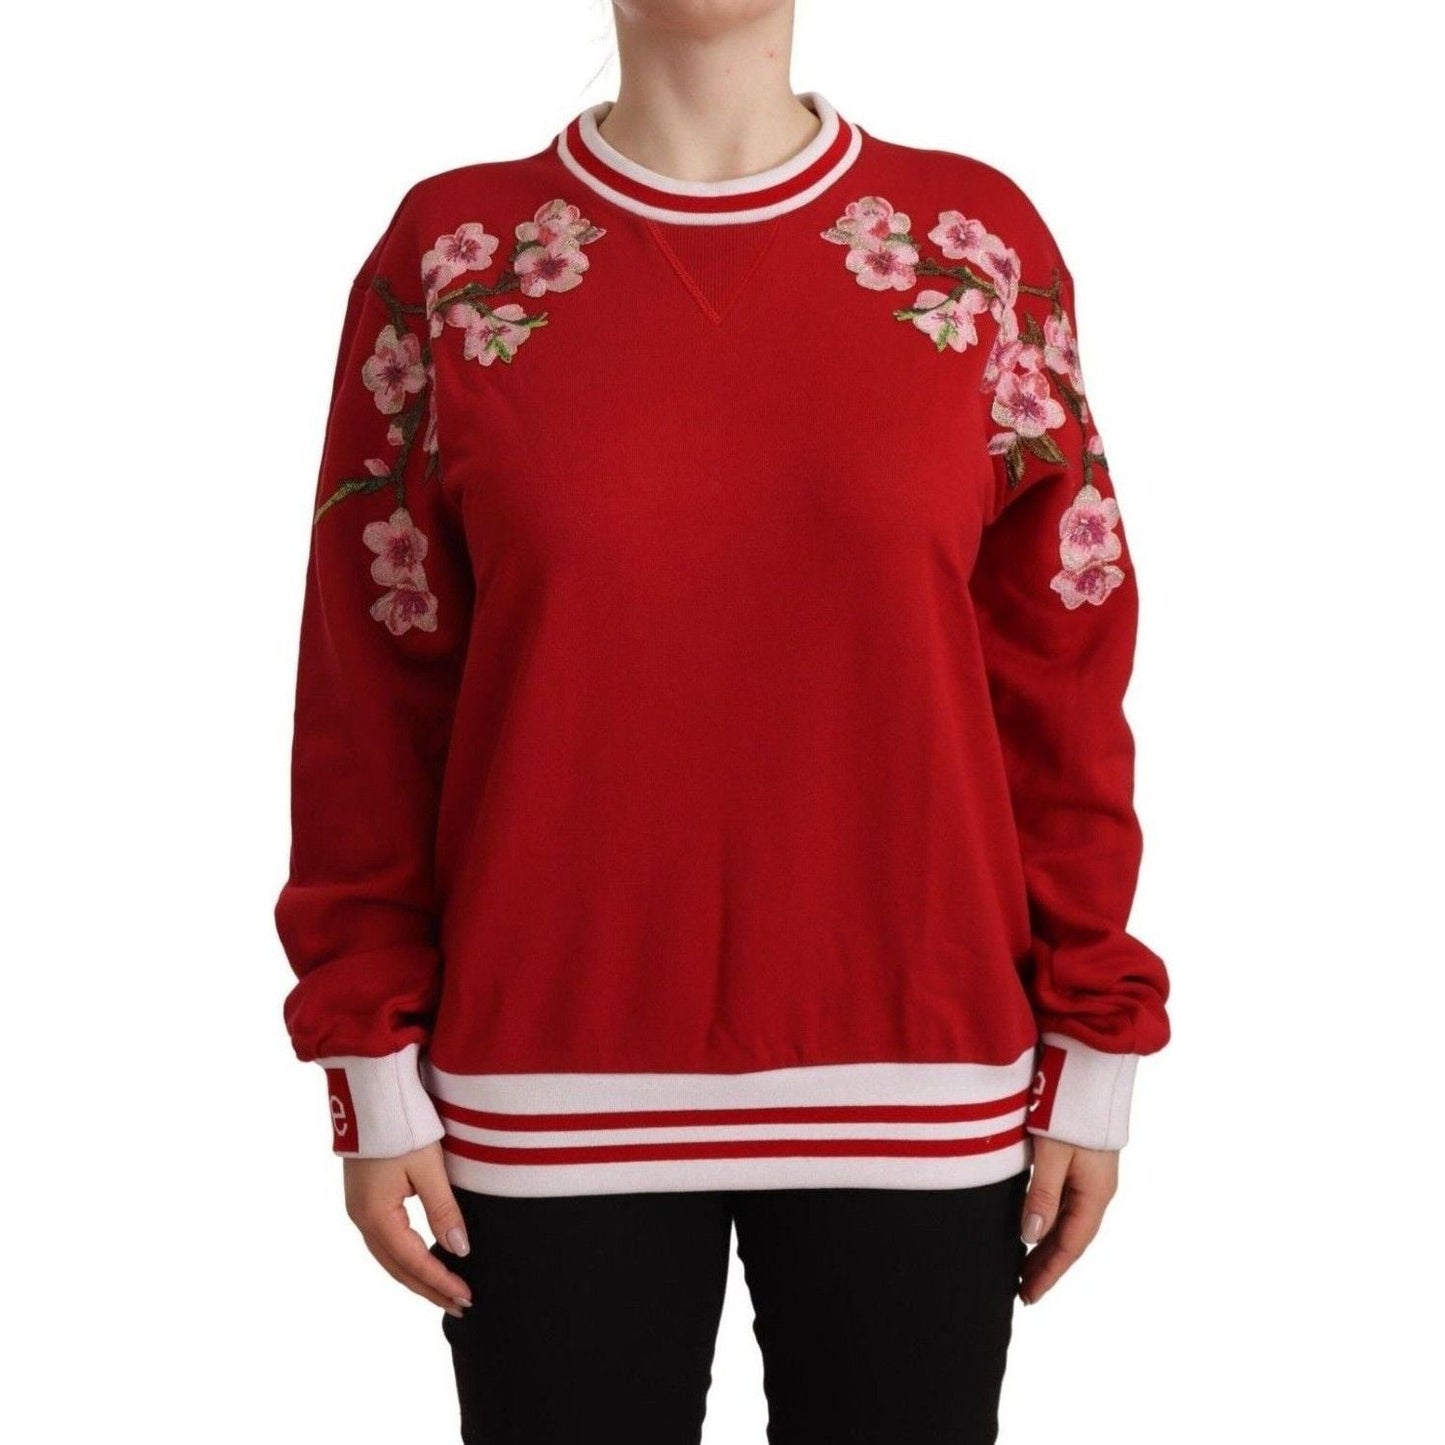 Dolce & Gabbana Elegant Red Crewneck Pullover with Floral Motif red-cotton-crewneck-dglove-pullover-sweater WOMAN SWEATERS s-l1600-21-8ae6e99c-2a6.jpg